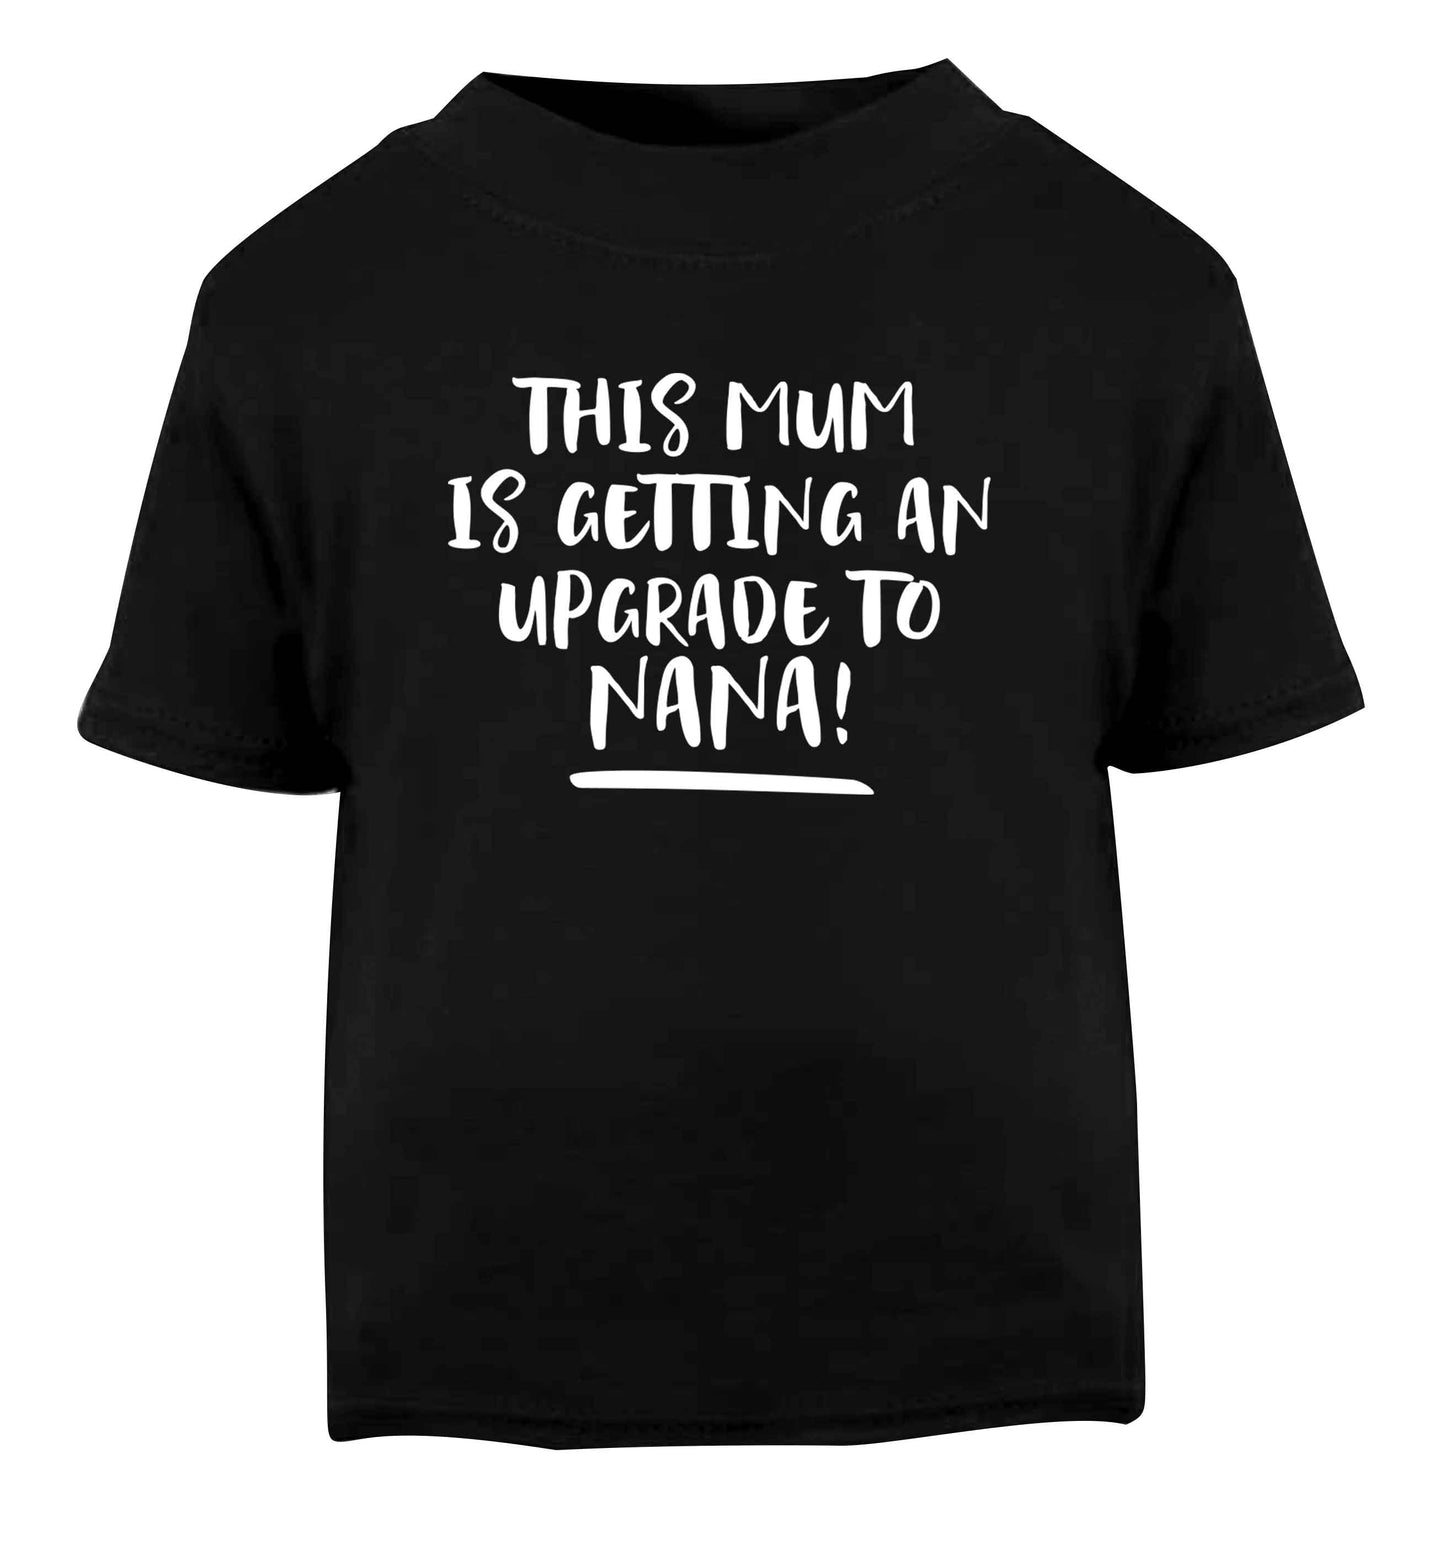 This mum is getting an upgrade to nana! Black Baby Toddler Tshirt 2 years